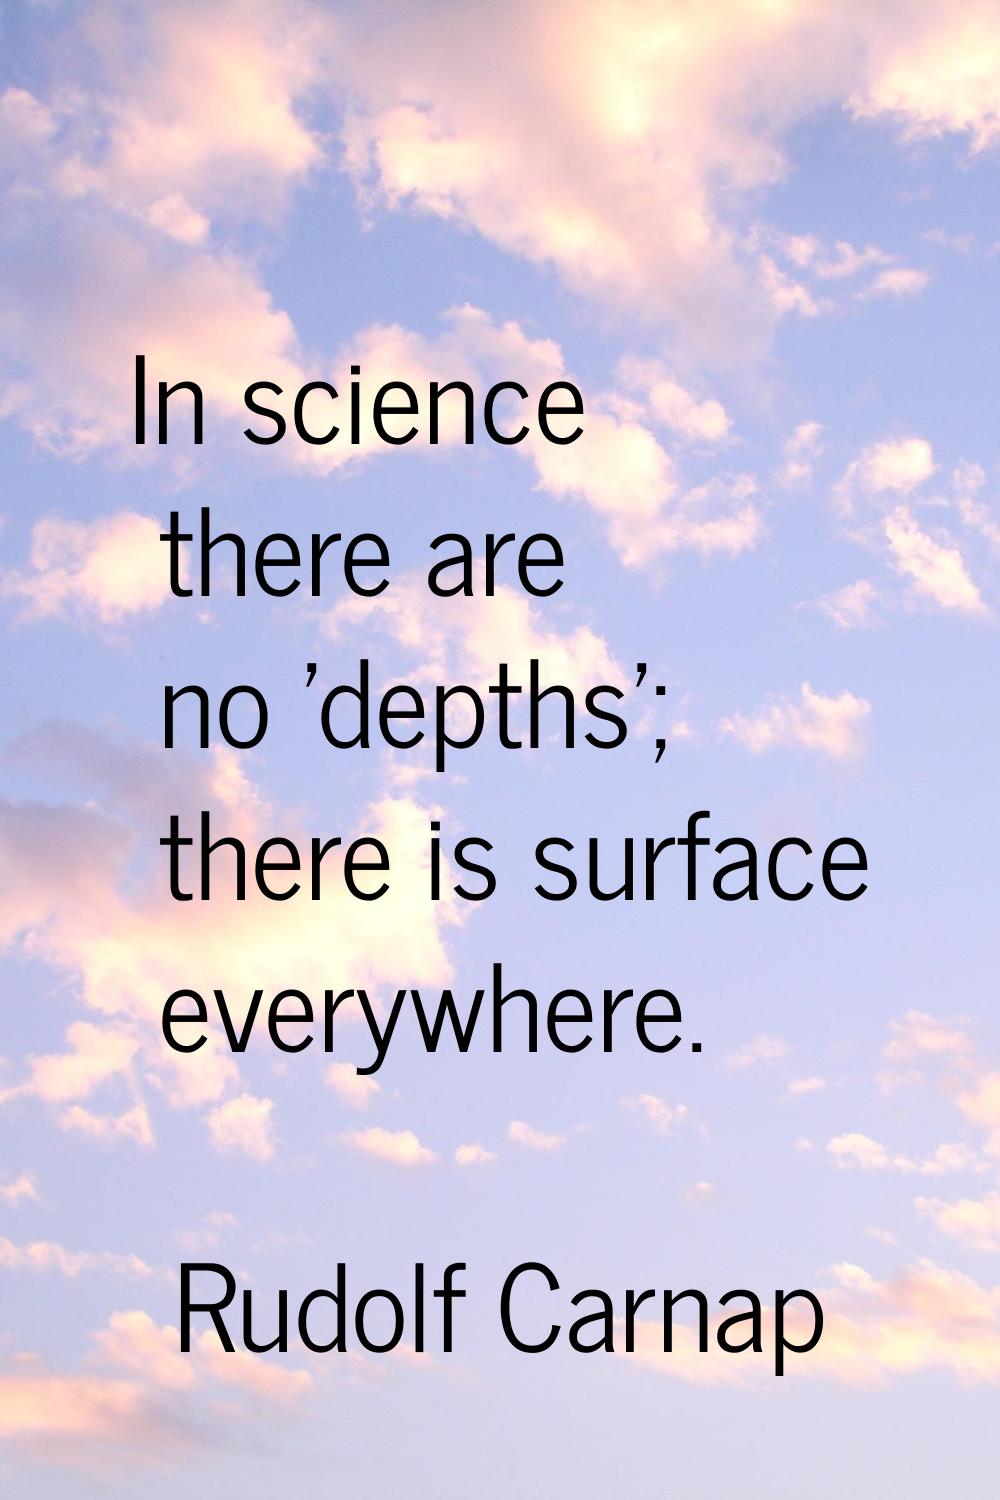 In science there are no 'depths'; there is surface everywhere.